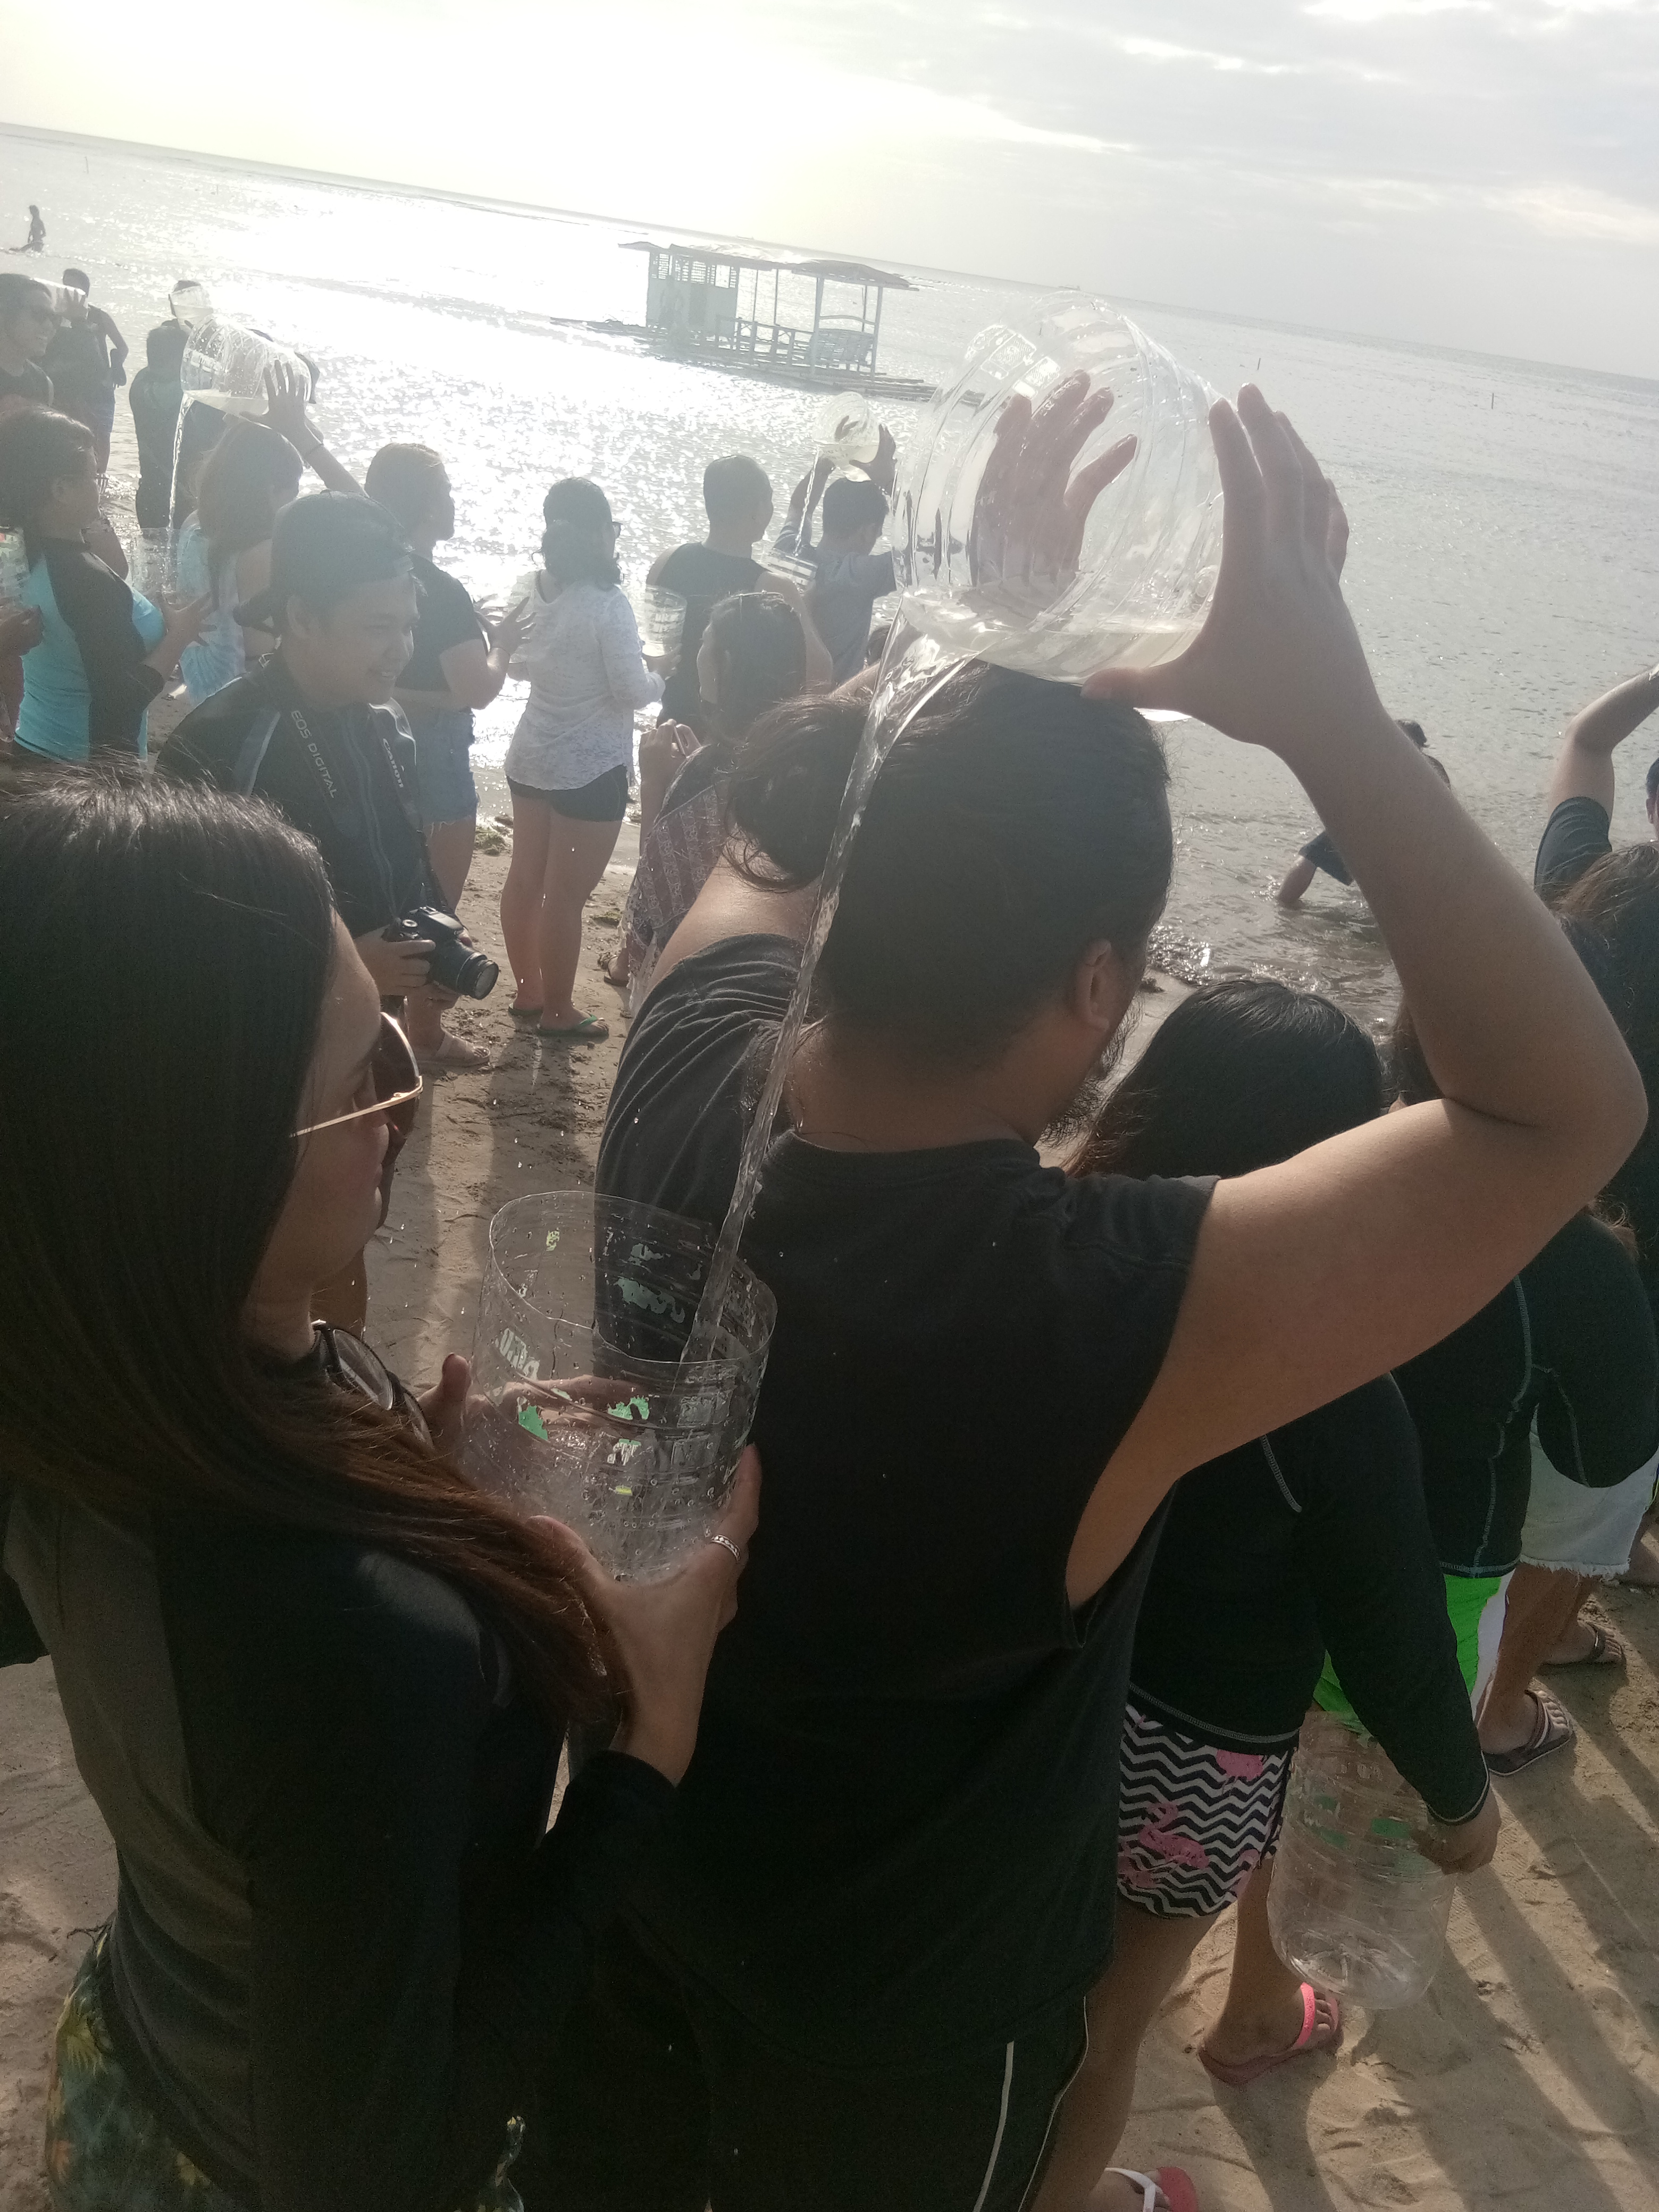 A player pours water into another player in the Water Relay Game